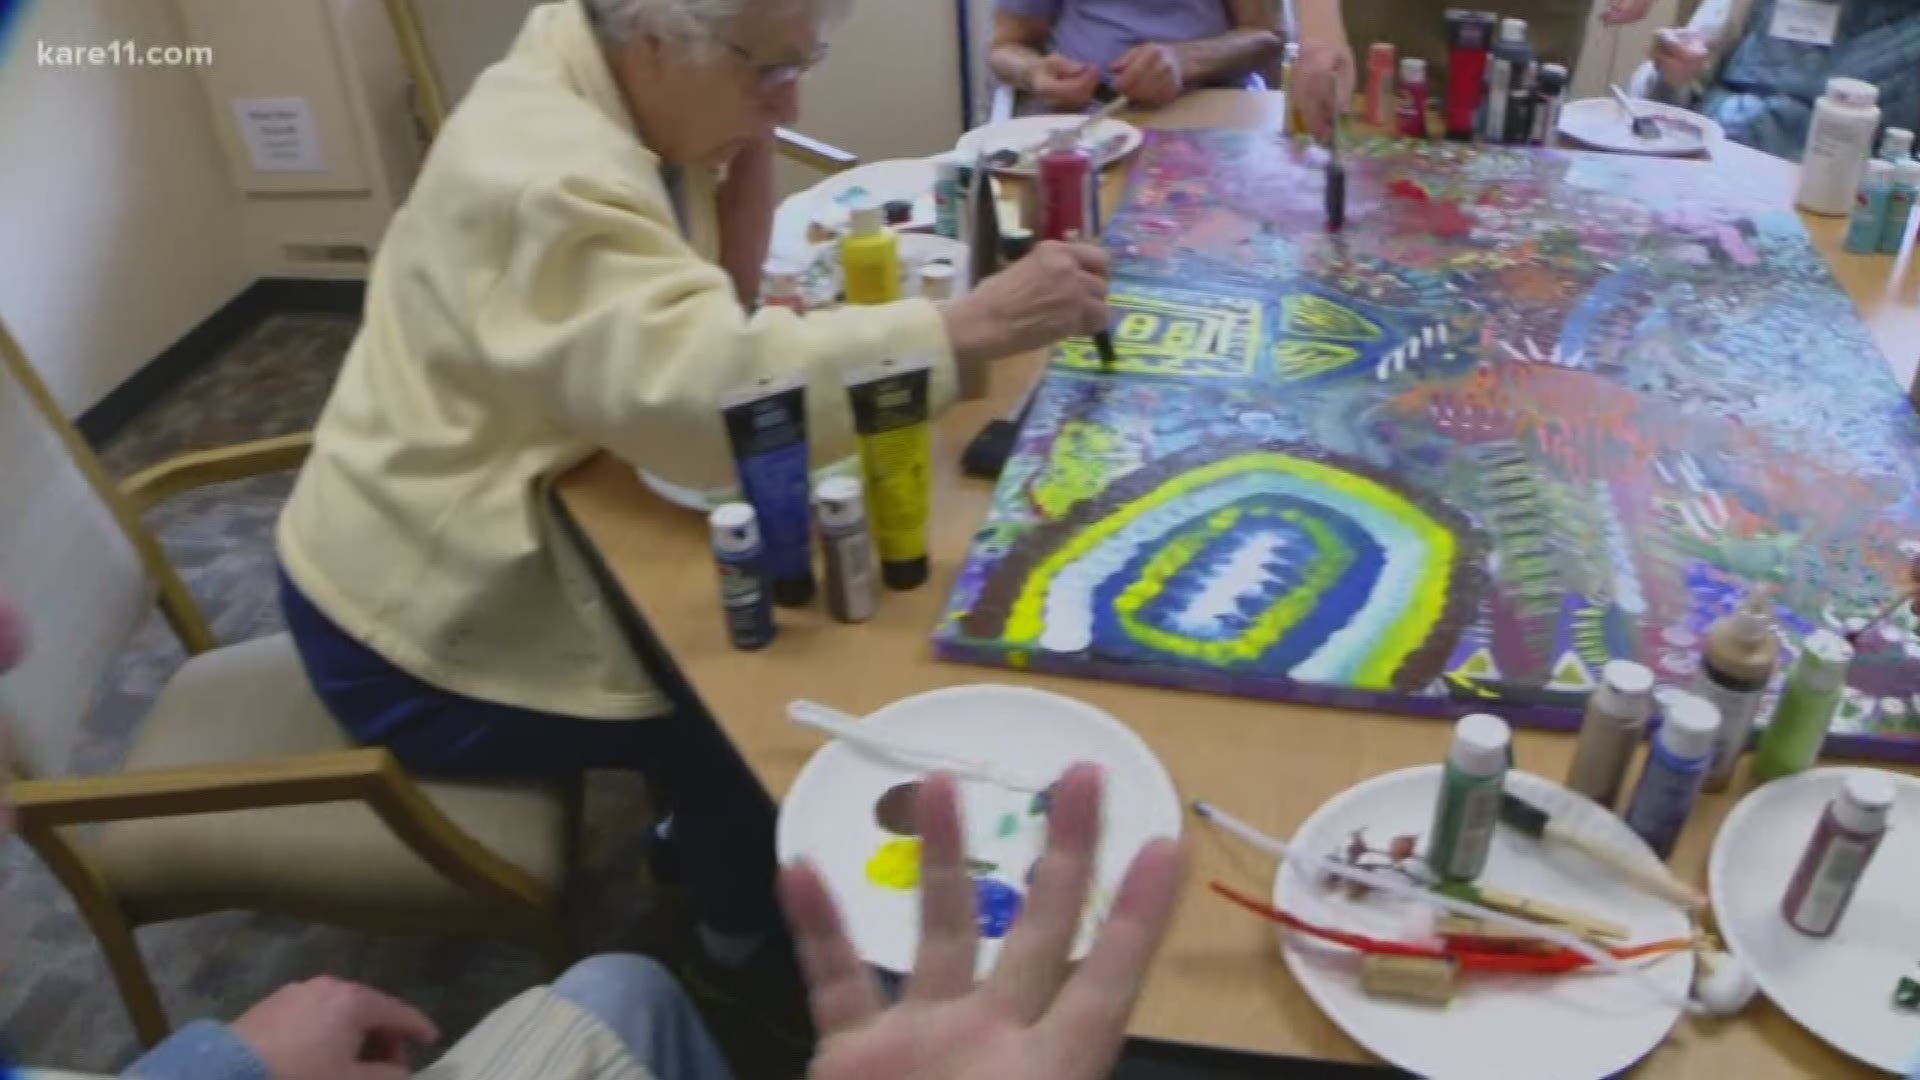 Open Circle members are currently working on an art piece that will hang on the wall at ICA Food Shelf in Minnetonka.